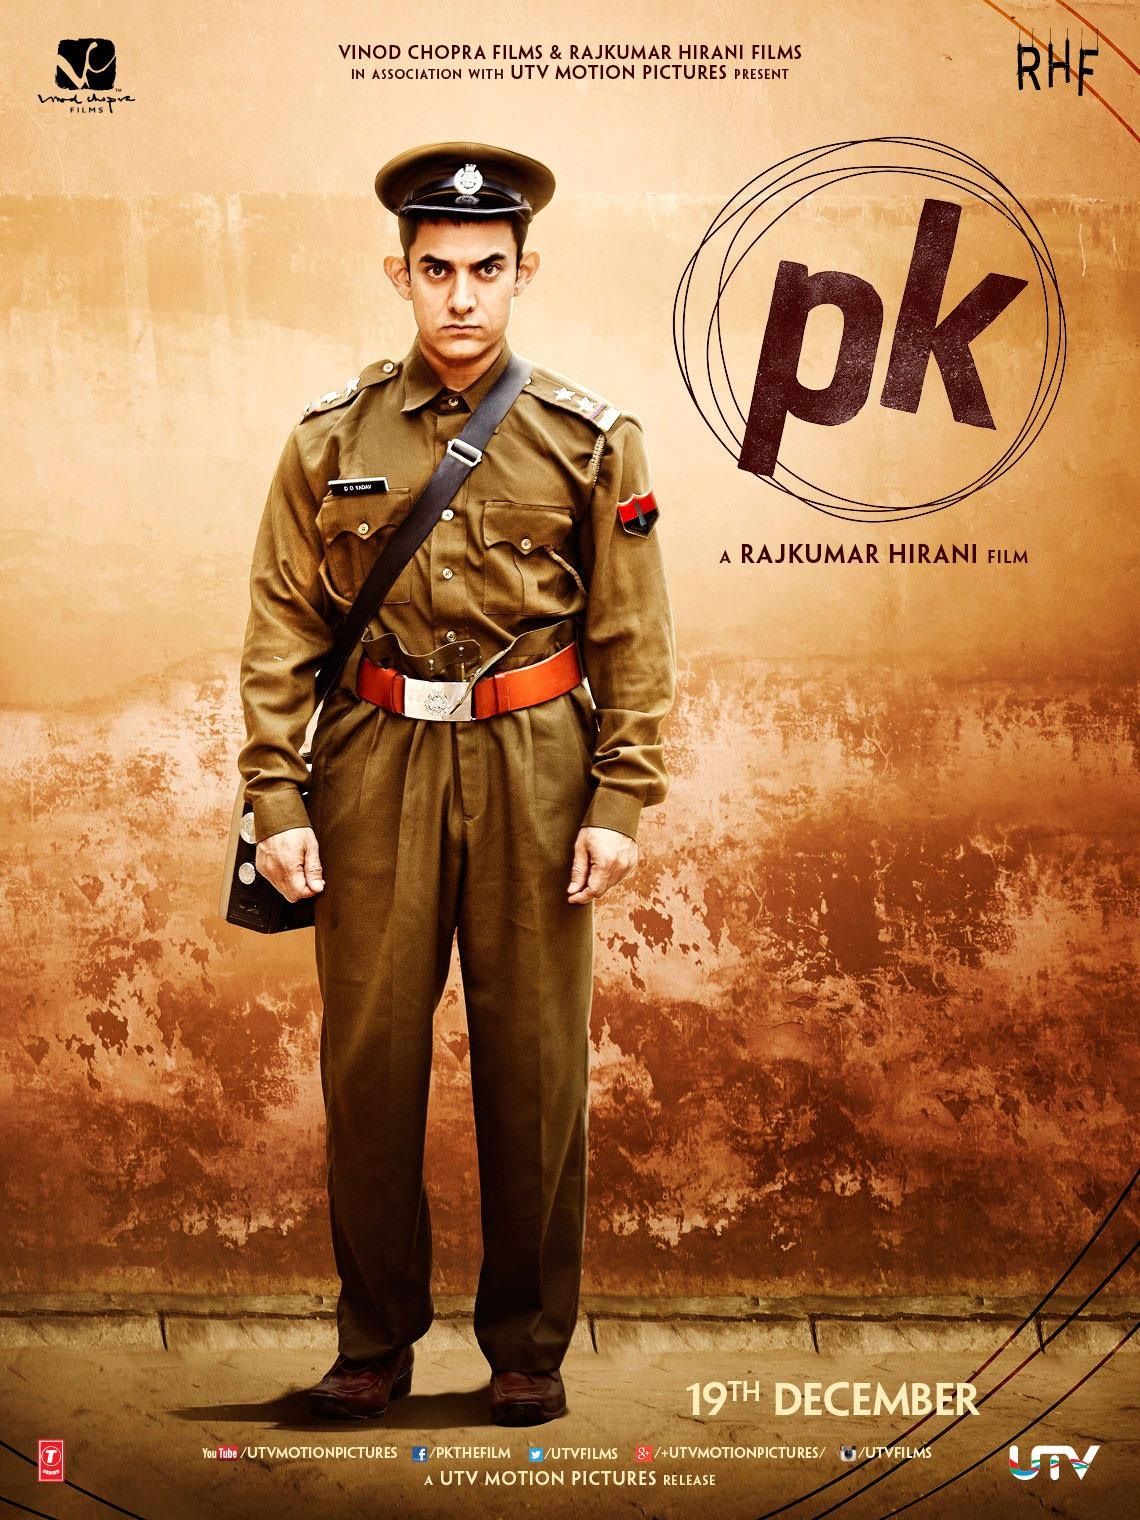 Pk Movie Poster HD Wallpaper Free Movies and TV Shows Online